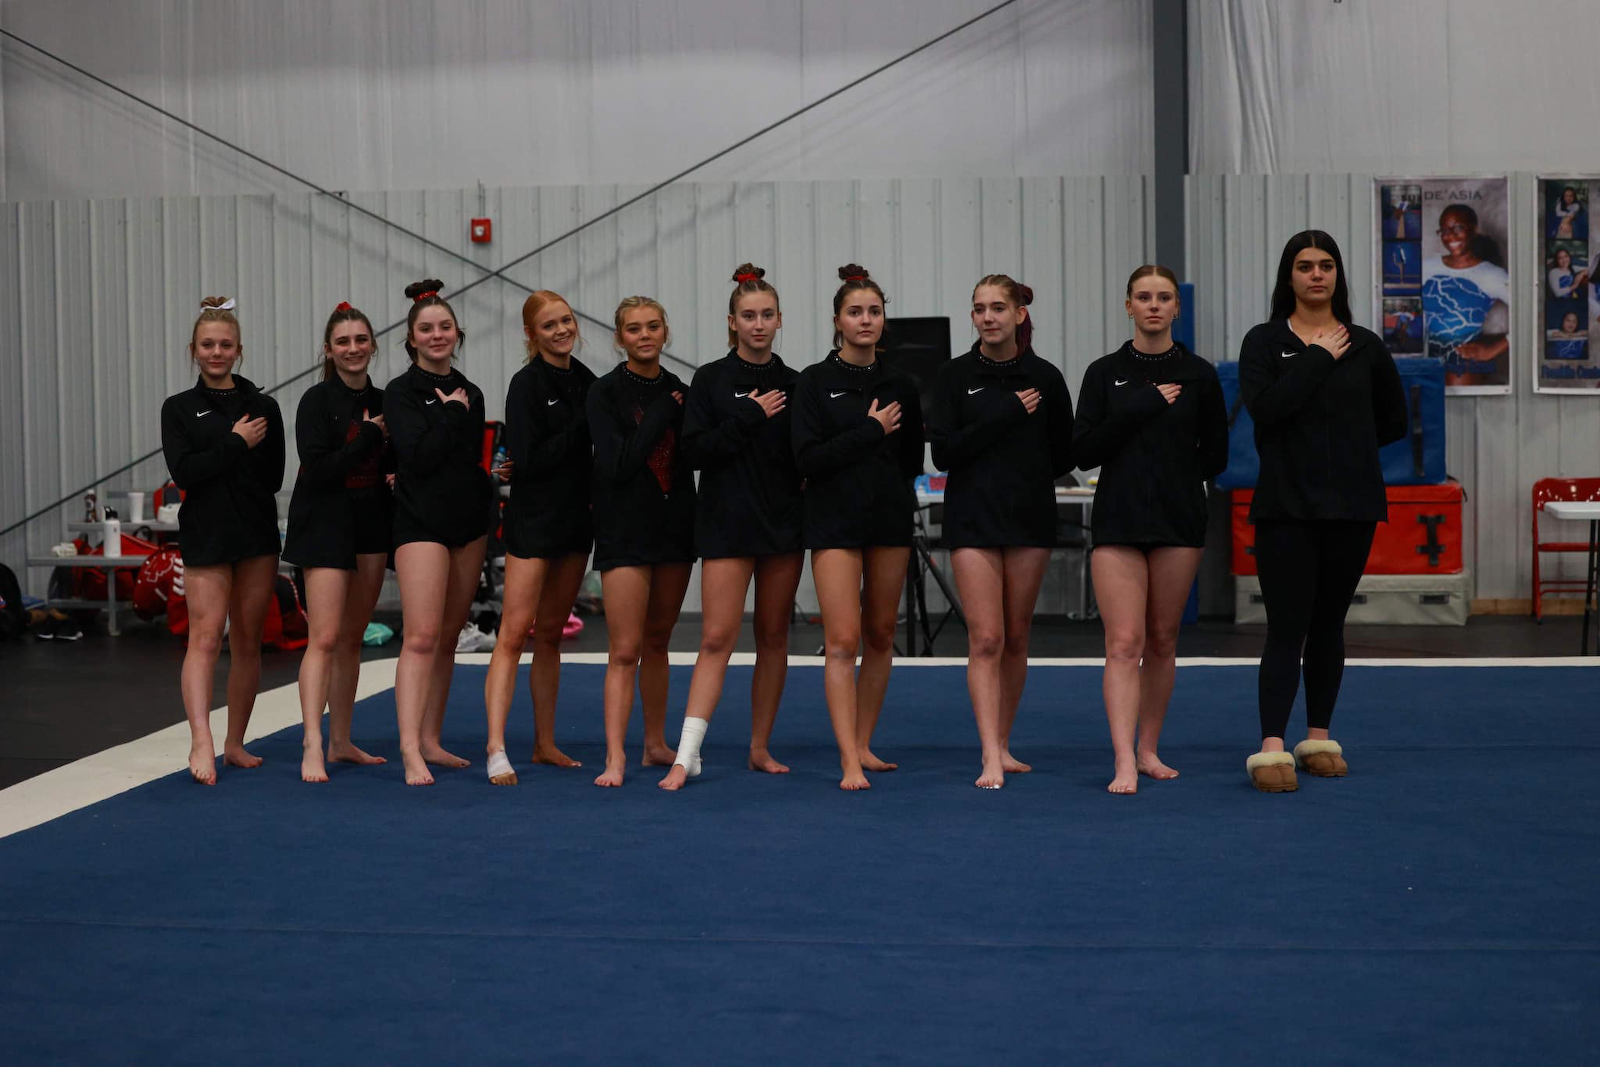 Gymnastics improves to 8-1 with victory over Roncalli cover photo